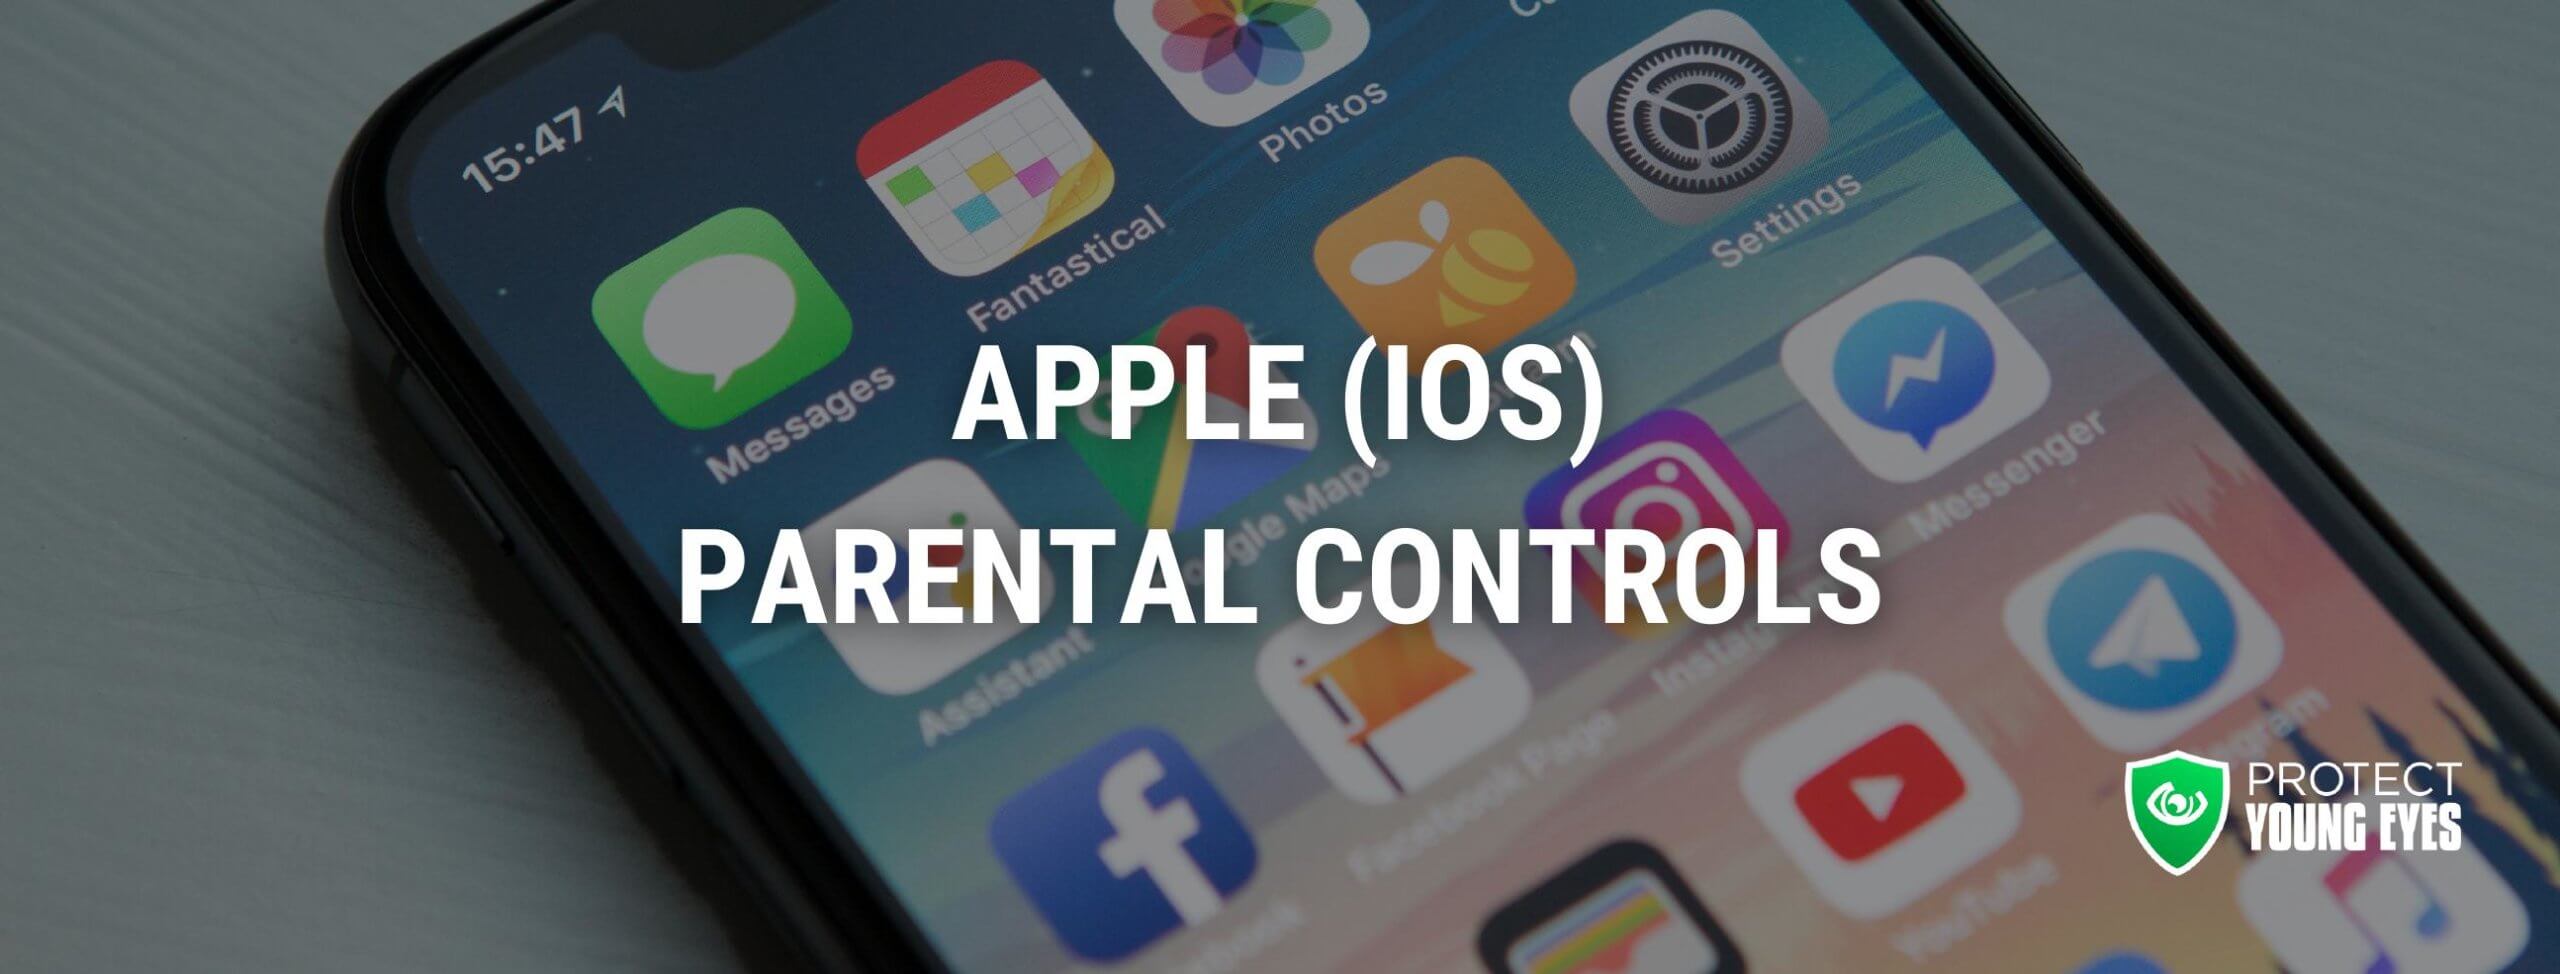 iOS Parental Controls (Screen Time) Complete Guide - Protect Young Eyes